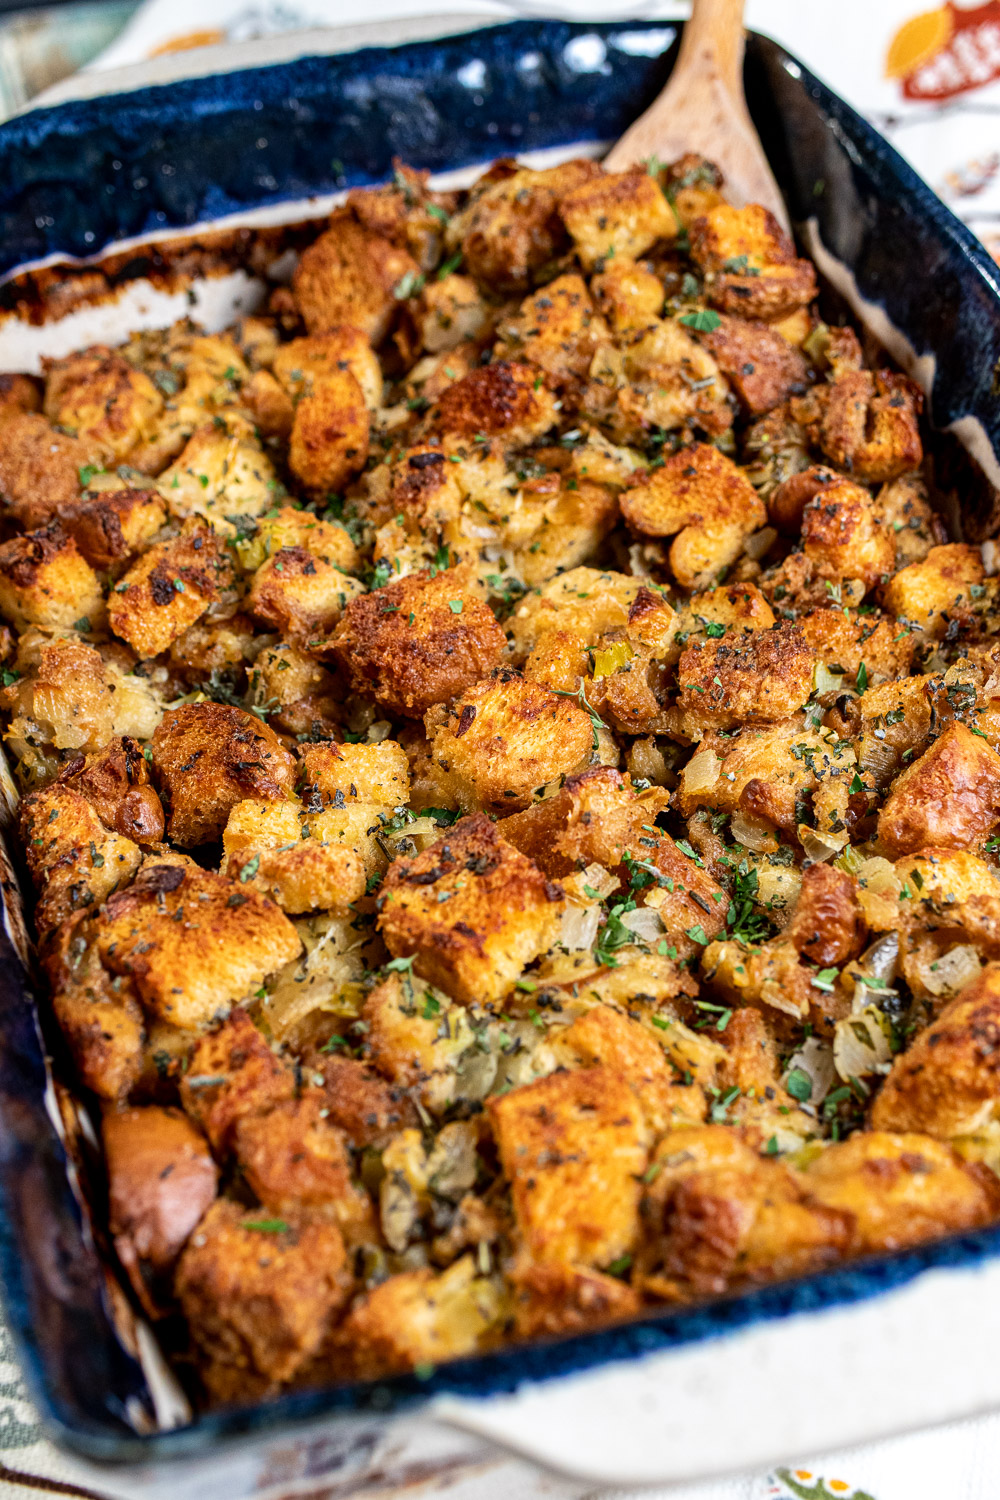 Classic Thanksgiving Stuffing How-To - The Night Owl Chef